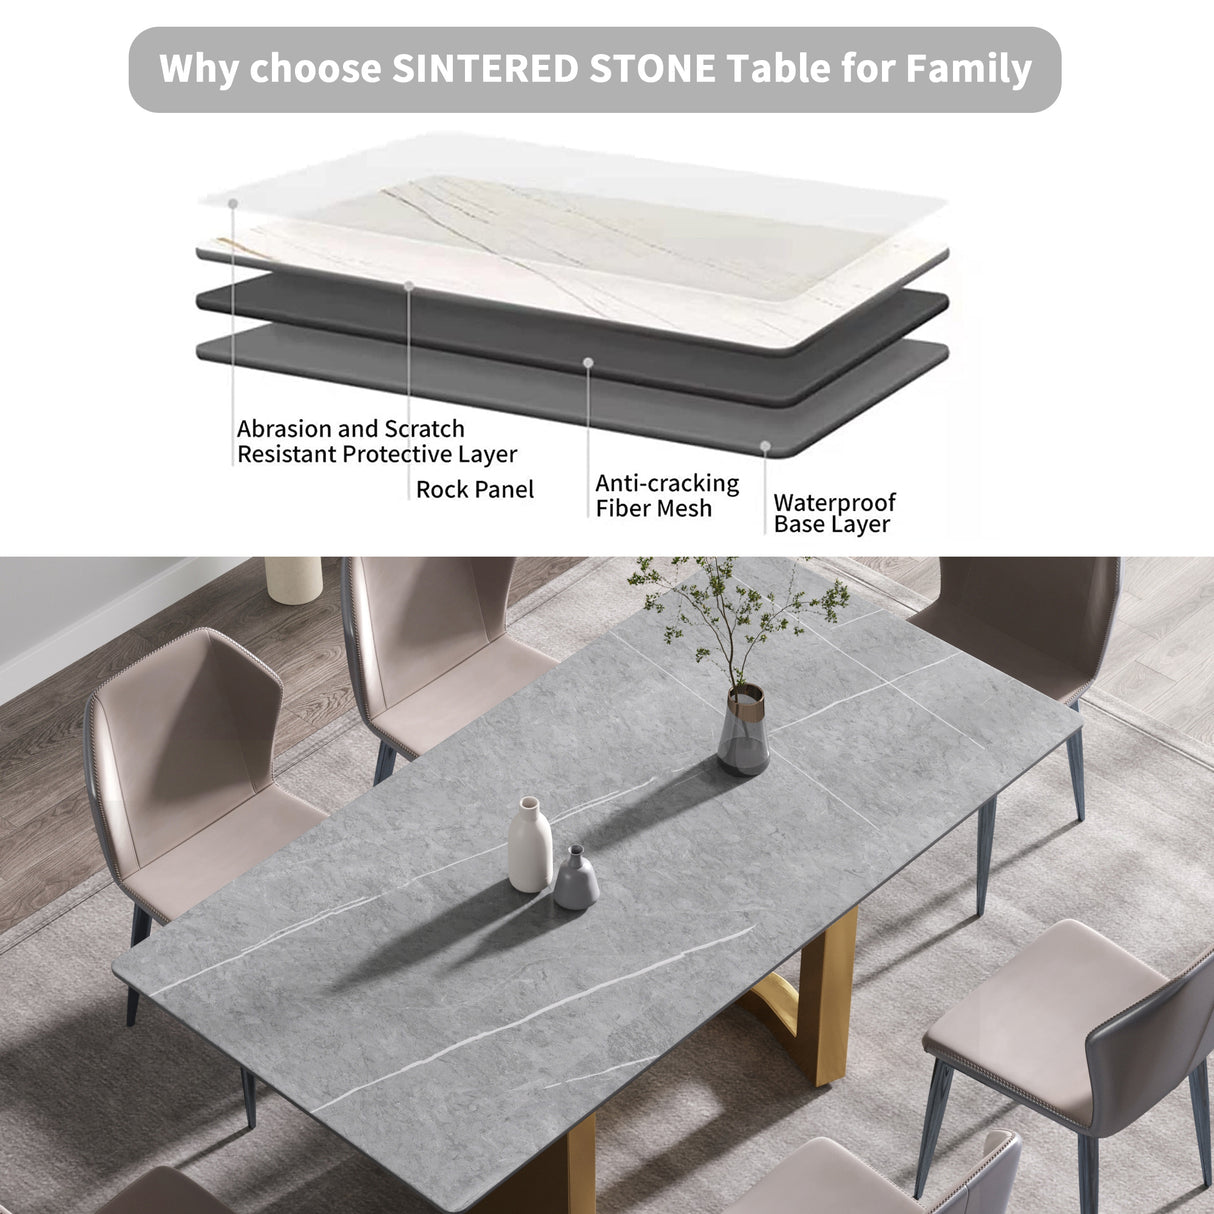 70.87" modern artificial stone gray straight edge golden metal leg dining table-can accommodate 6-8 people - Home Elegance USA